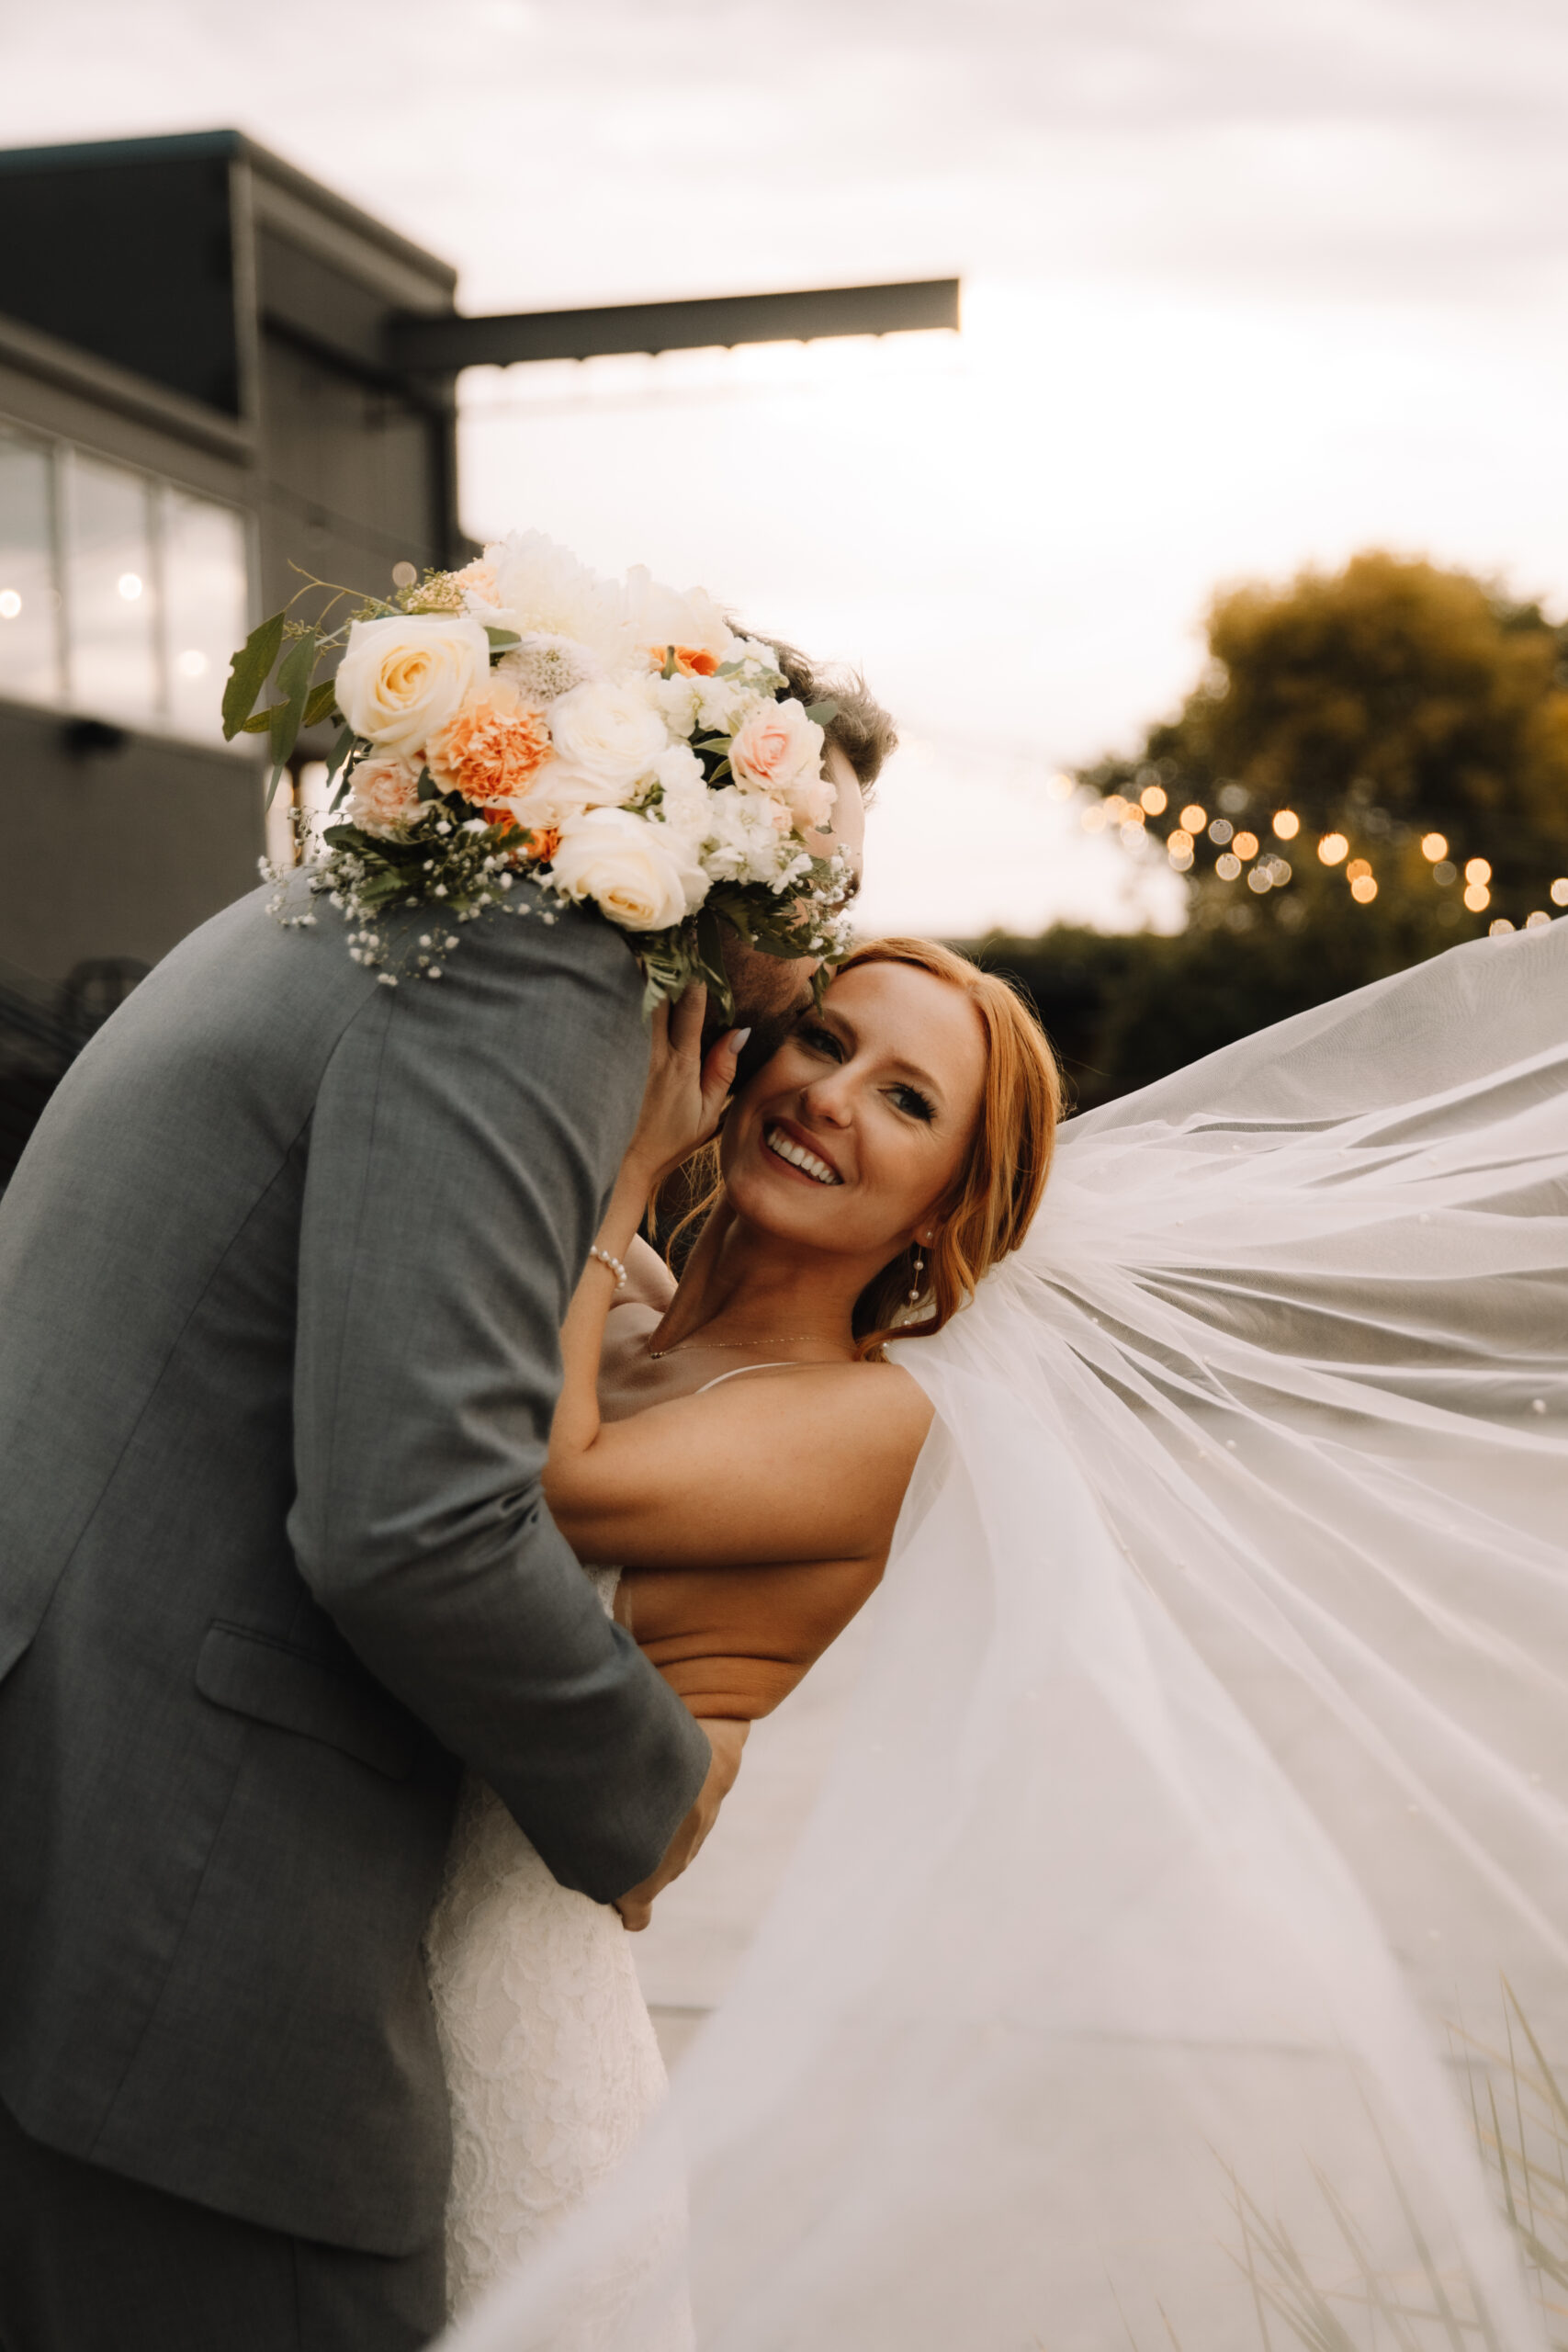 Bride smiling as her husband kisses her neck. Her bouquet with white and peach flowers leans over his back